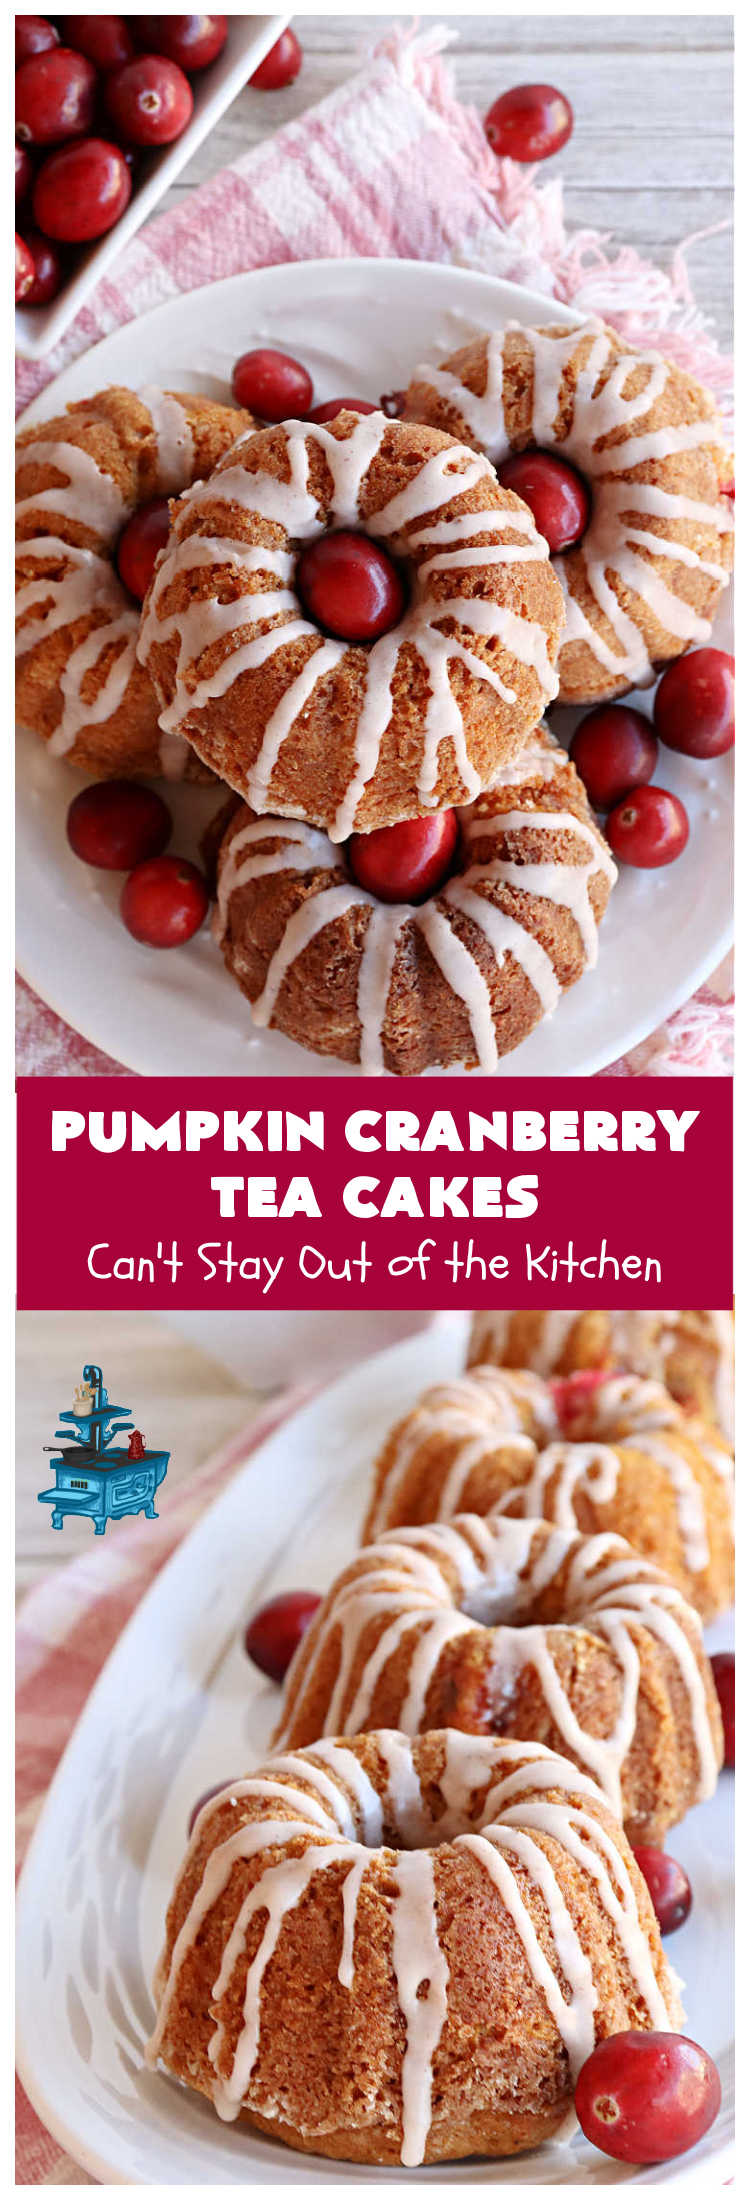 Pumpkin Cranberry Tea Cakes | Can't Stay Out of the Kitchen | these luscious #TeaCakes contain both #pumpkin & #cranberries. Plus, they're iced with a luscious #cinnamon frosting. They're marvelous for #holiday or #Christmas #baking & parties. Prepare to swoon after just one bite! #dessert #cake #HolidayDessert #PumpkinDessert #CranberryDessert #PumpkinCranberryTeaCakes